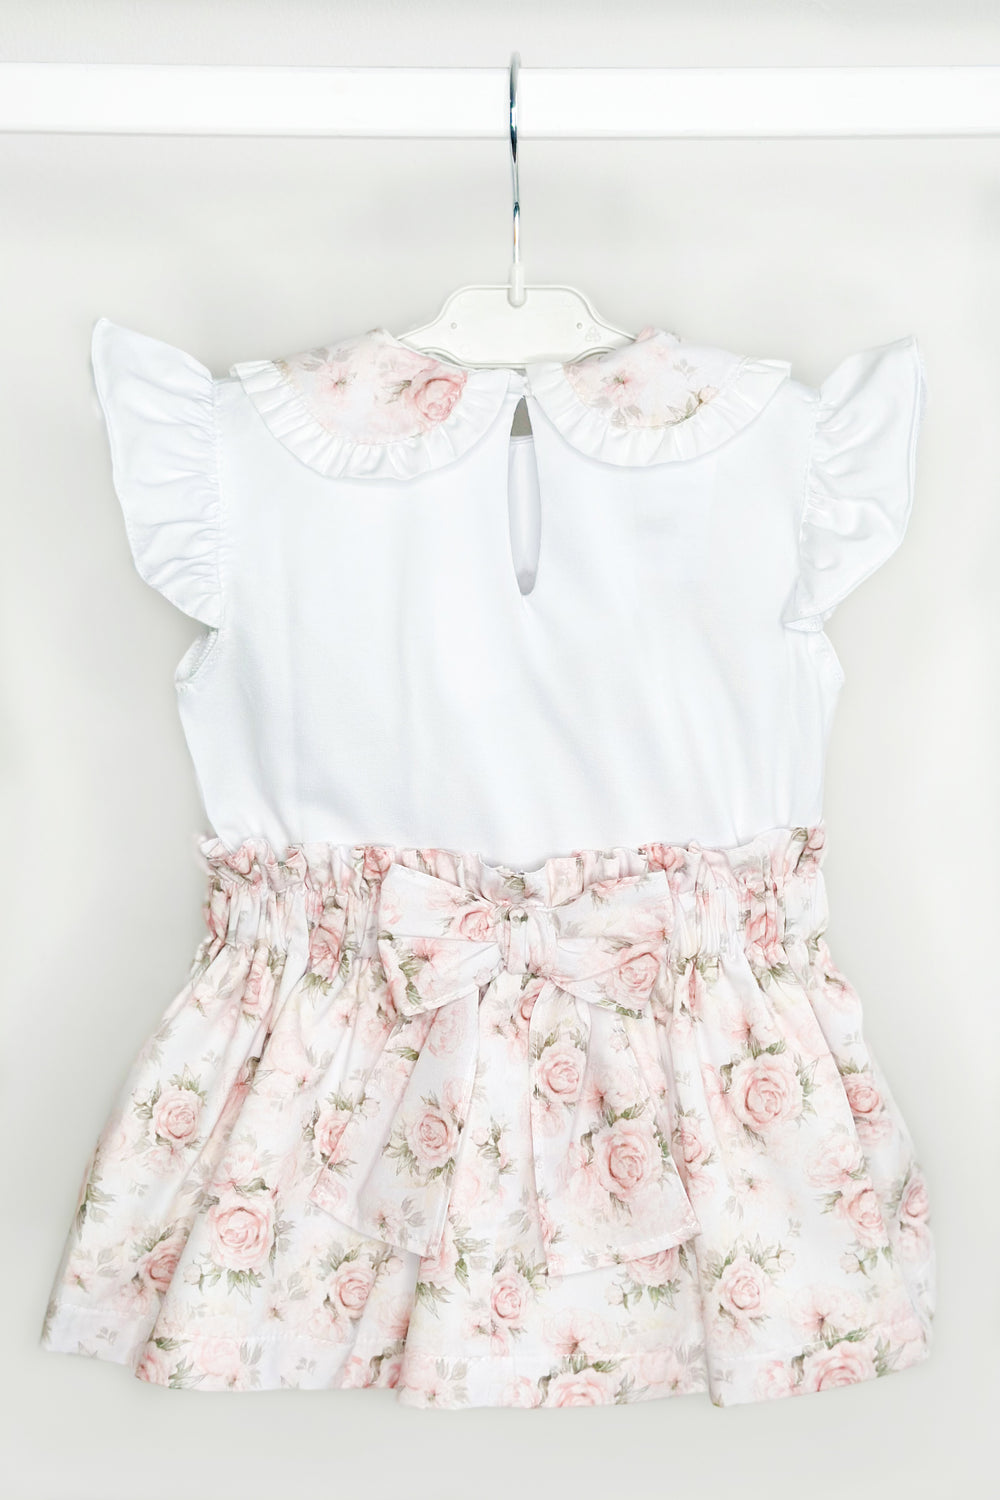 Puro Mimo "Wendy" Pale Pink Vintage Floral Top & Skirt | Millie and John